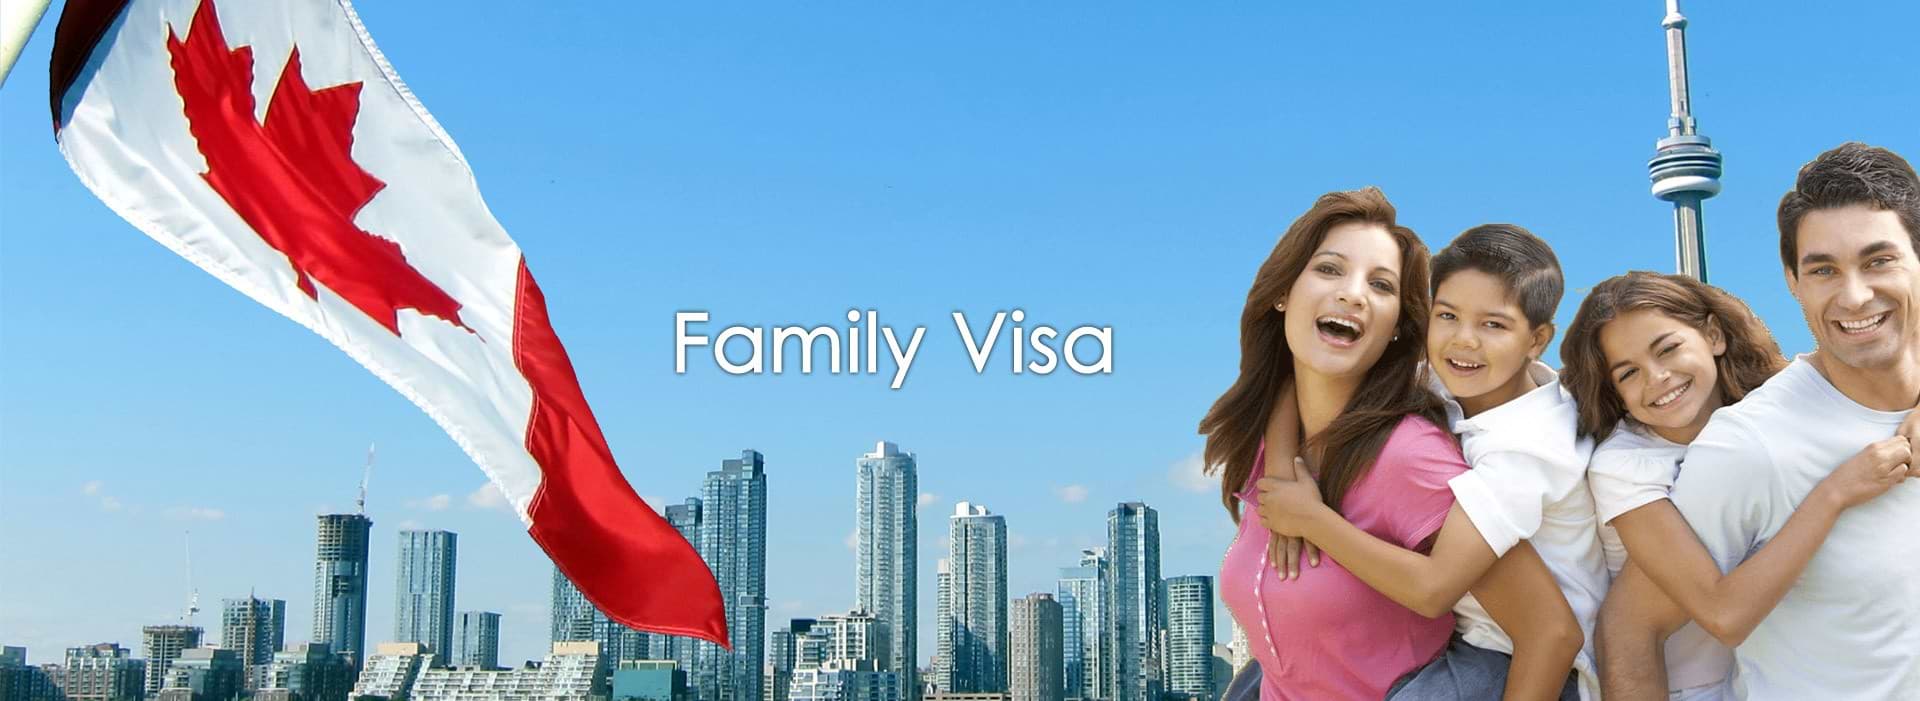 Consultants for family visa and migration are here!